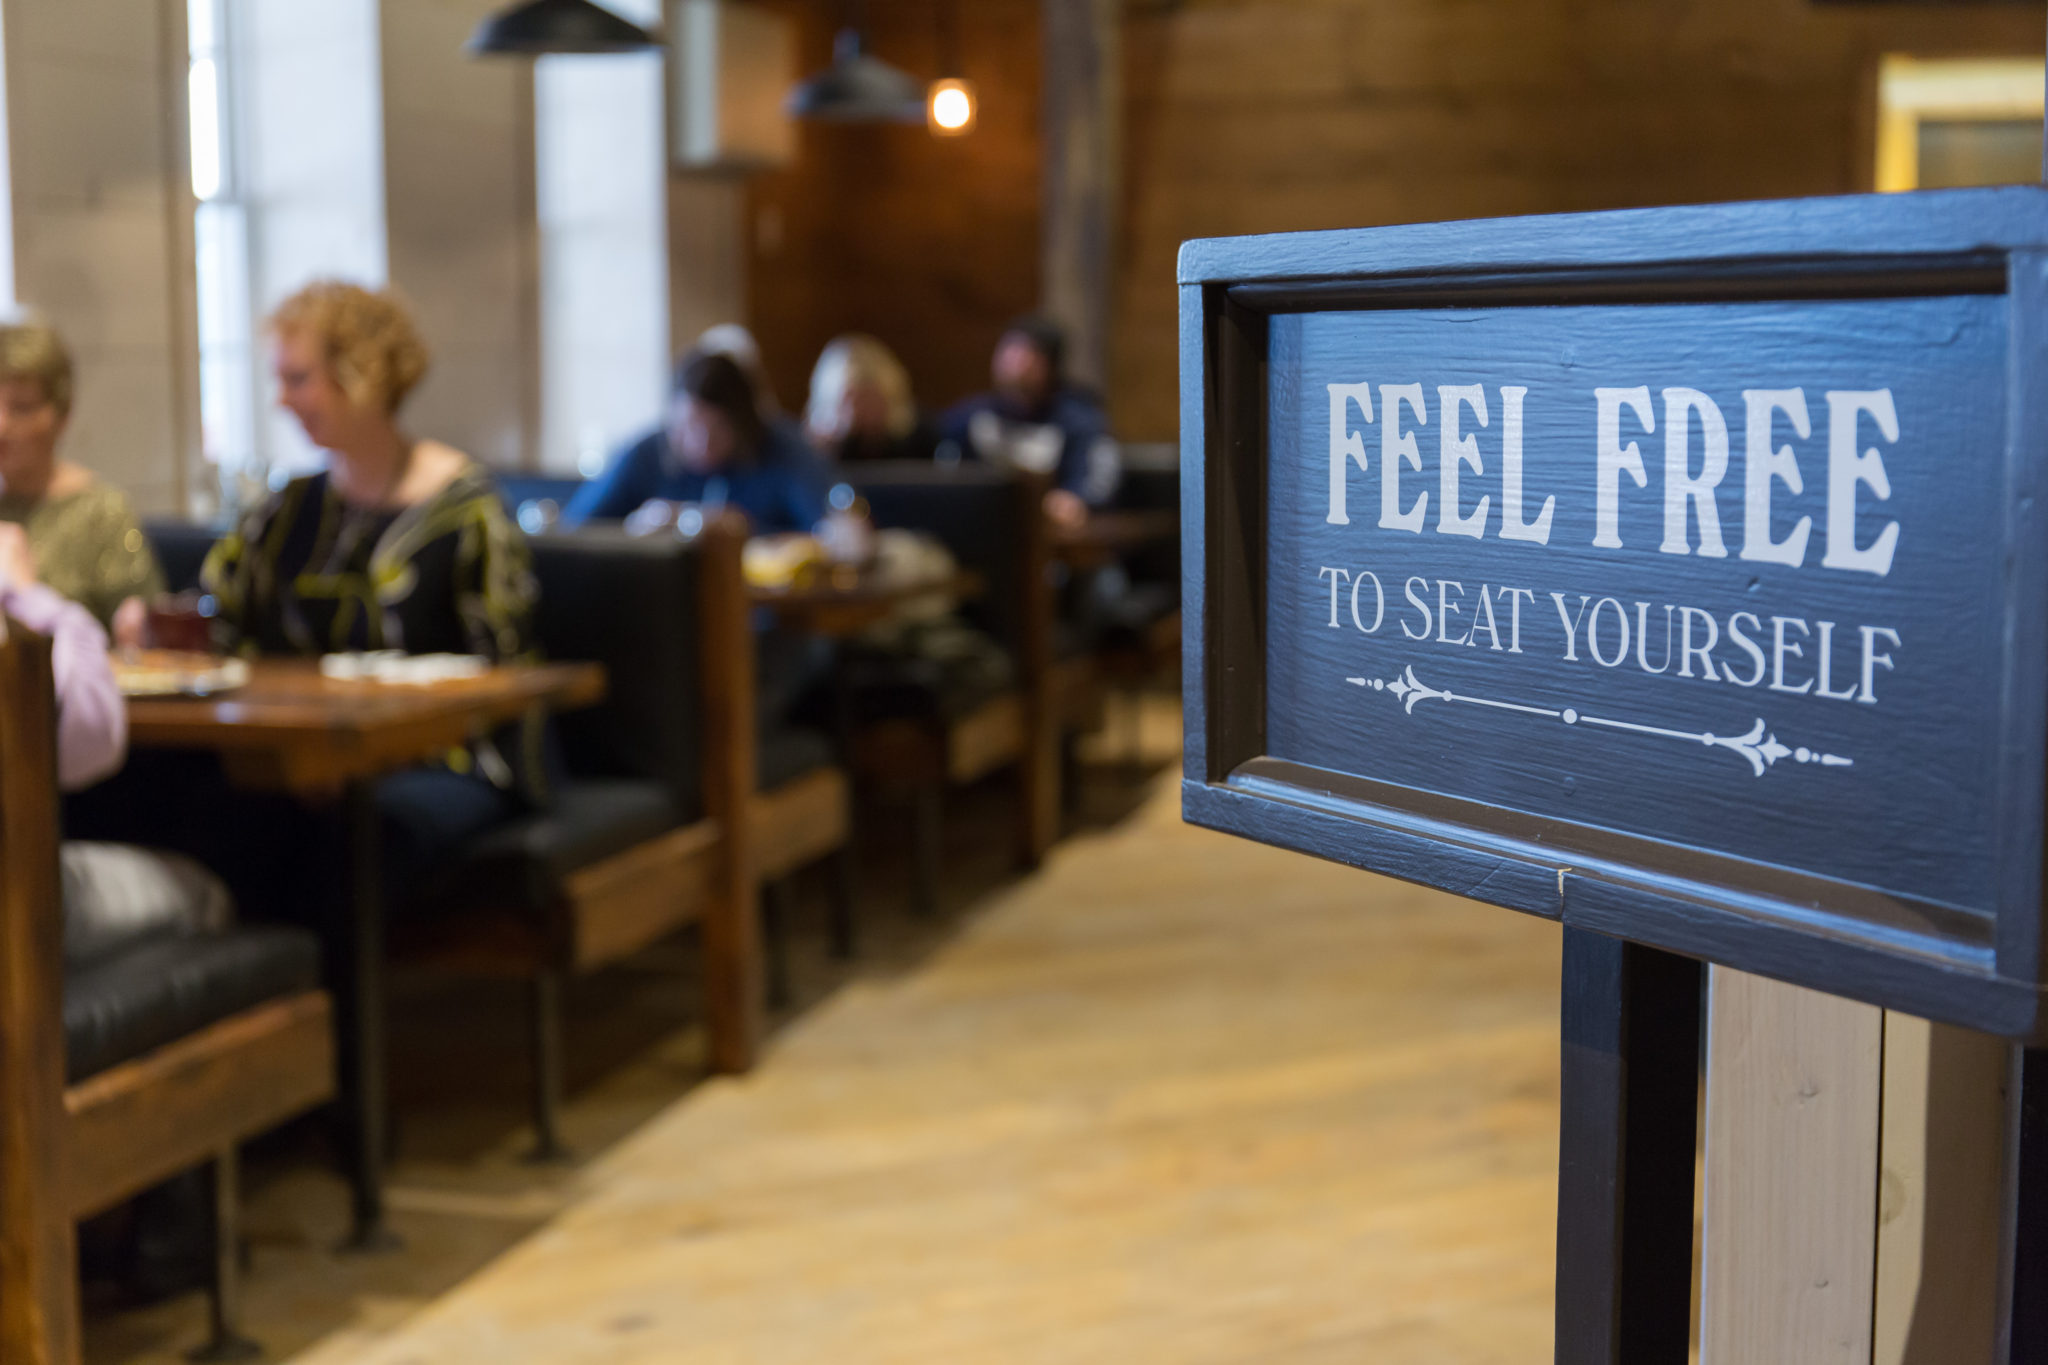 New Hope Mills Cafe' and Store "Feel Free to Seat Yourself" in-store sign